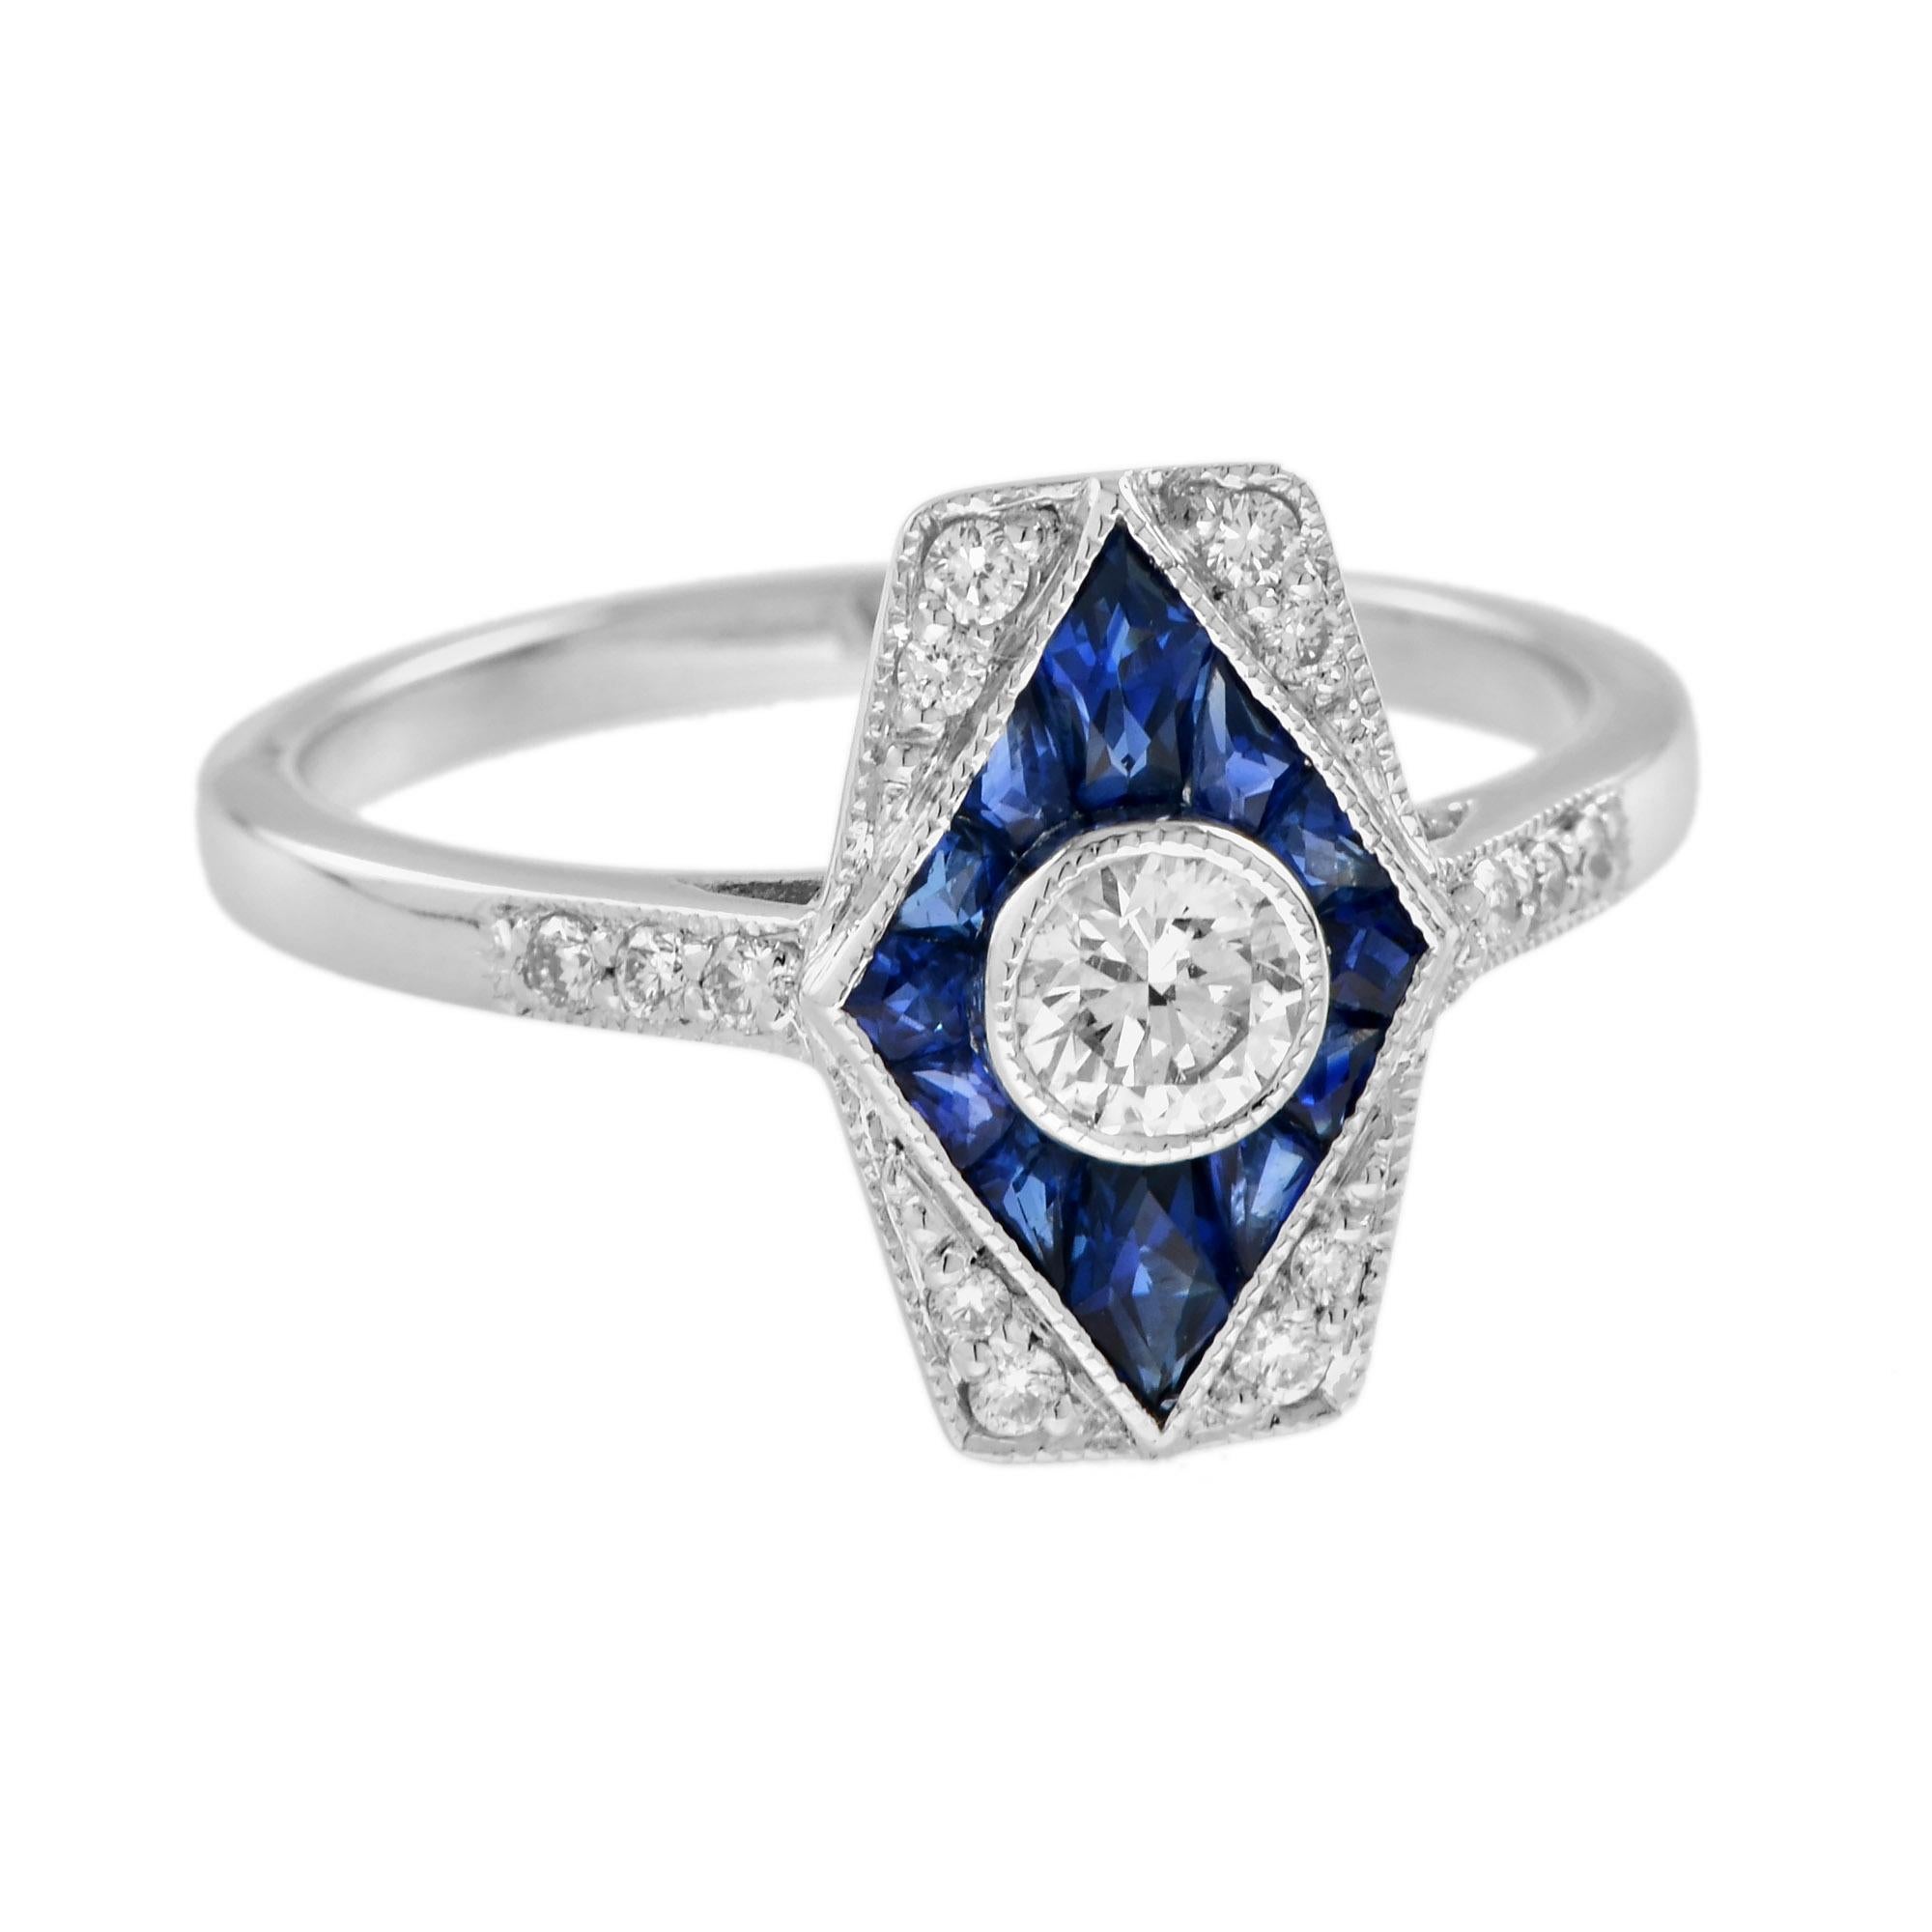 For Sale:  Diamond and Sapphire Art Deco Style Rhombus Engagement Ring in 18K White Gold  3